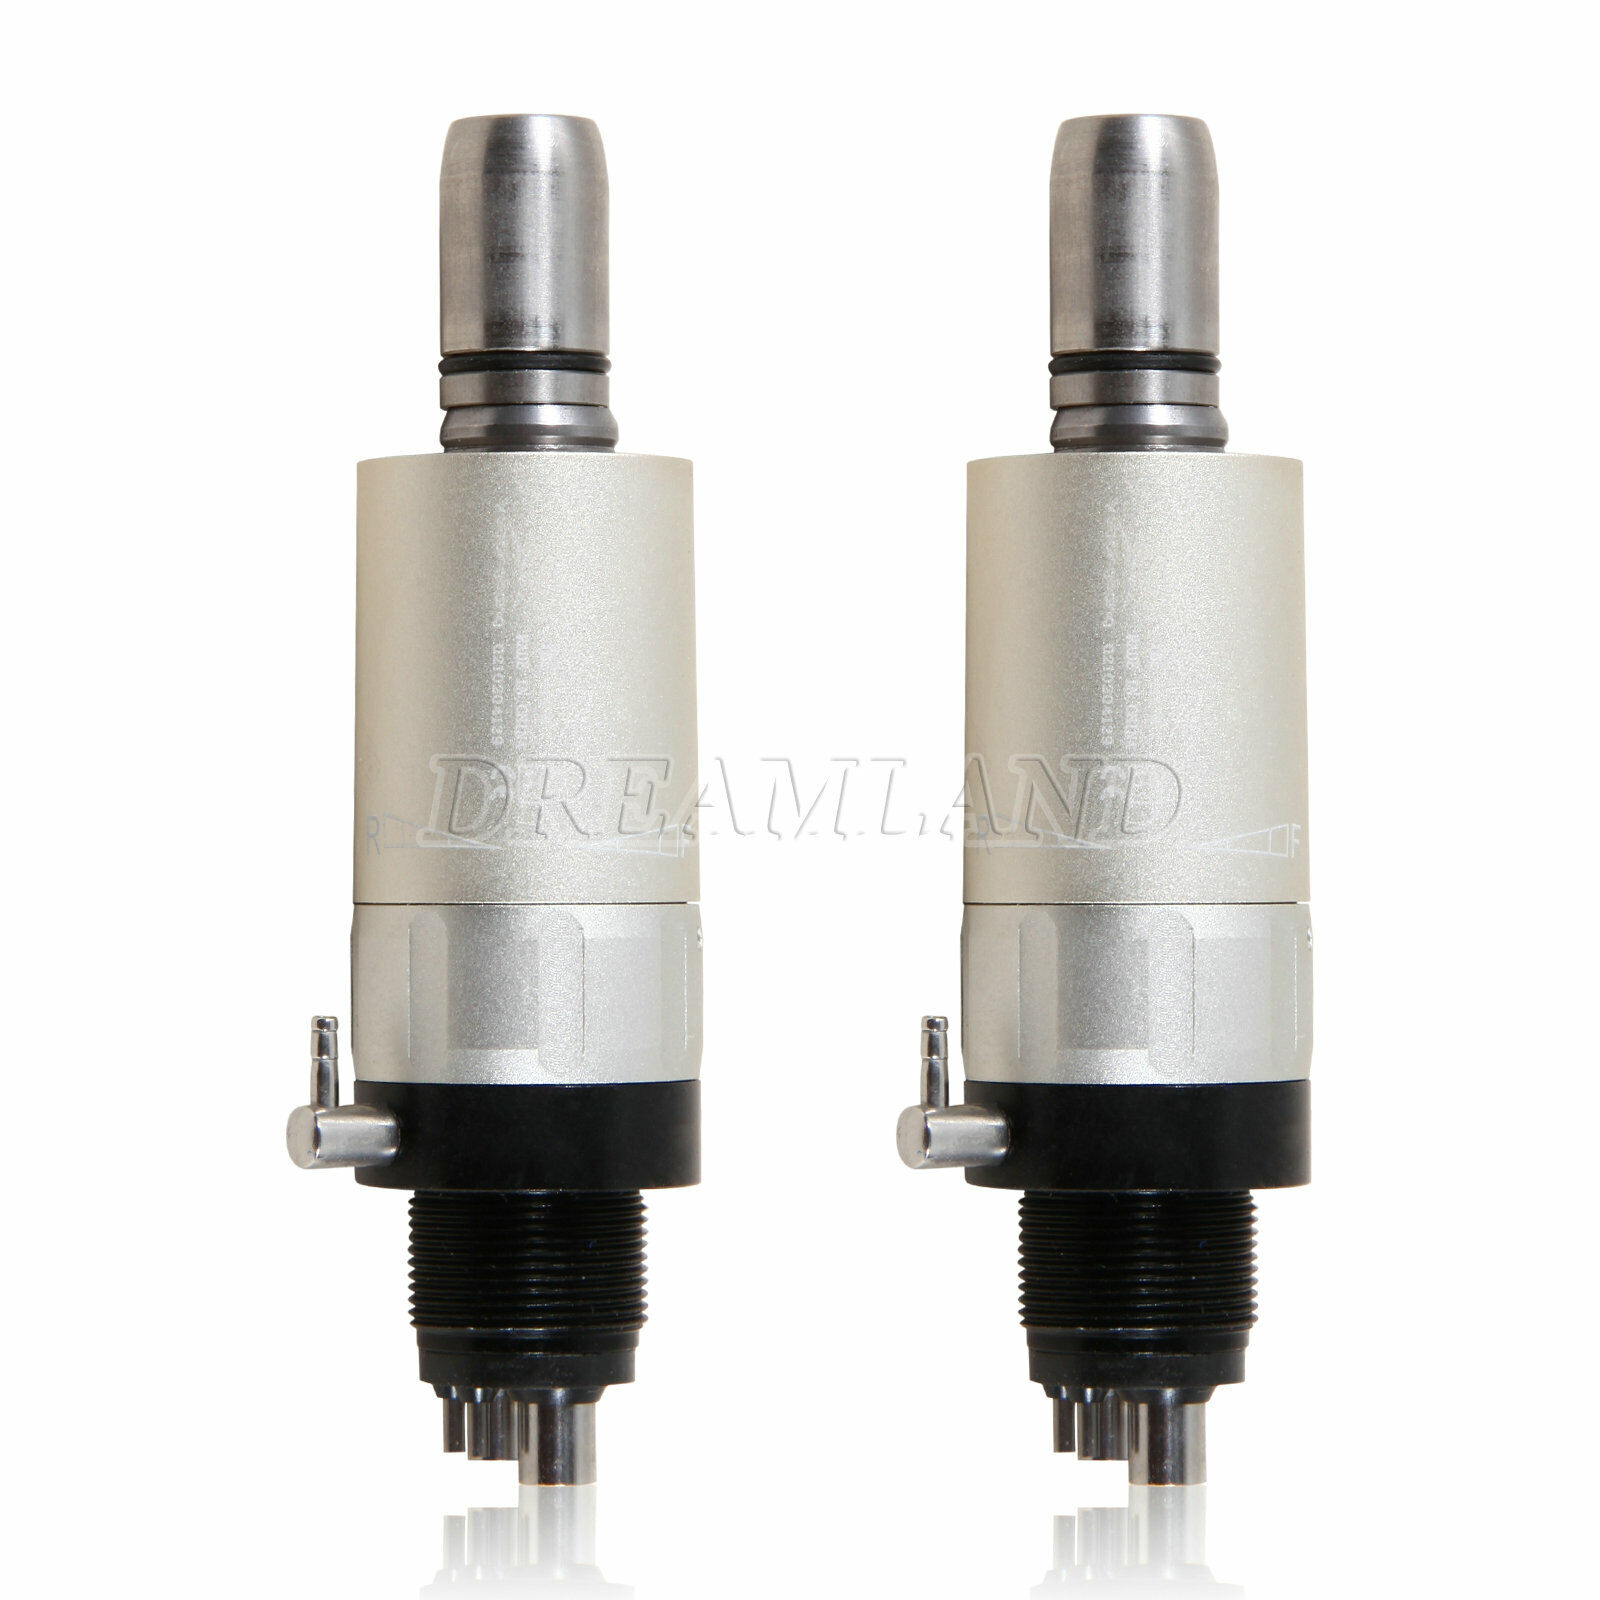 2PCS NSK Style Dental Low Speed Air Motor Handpiece 4 Hole 1:1 Ratio